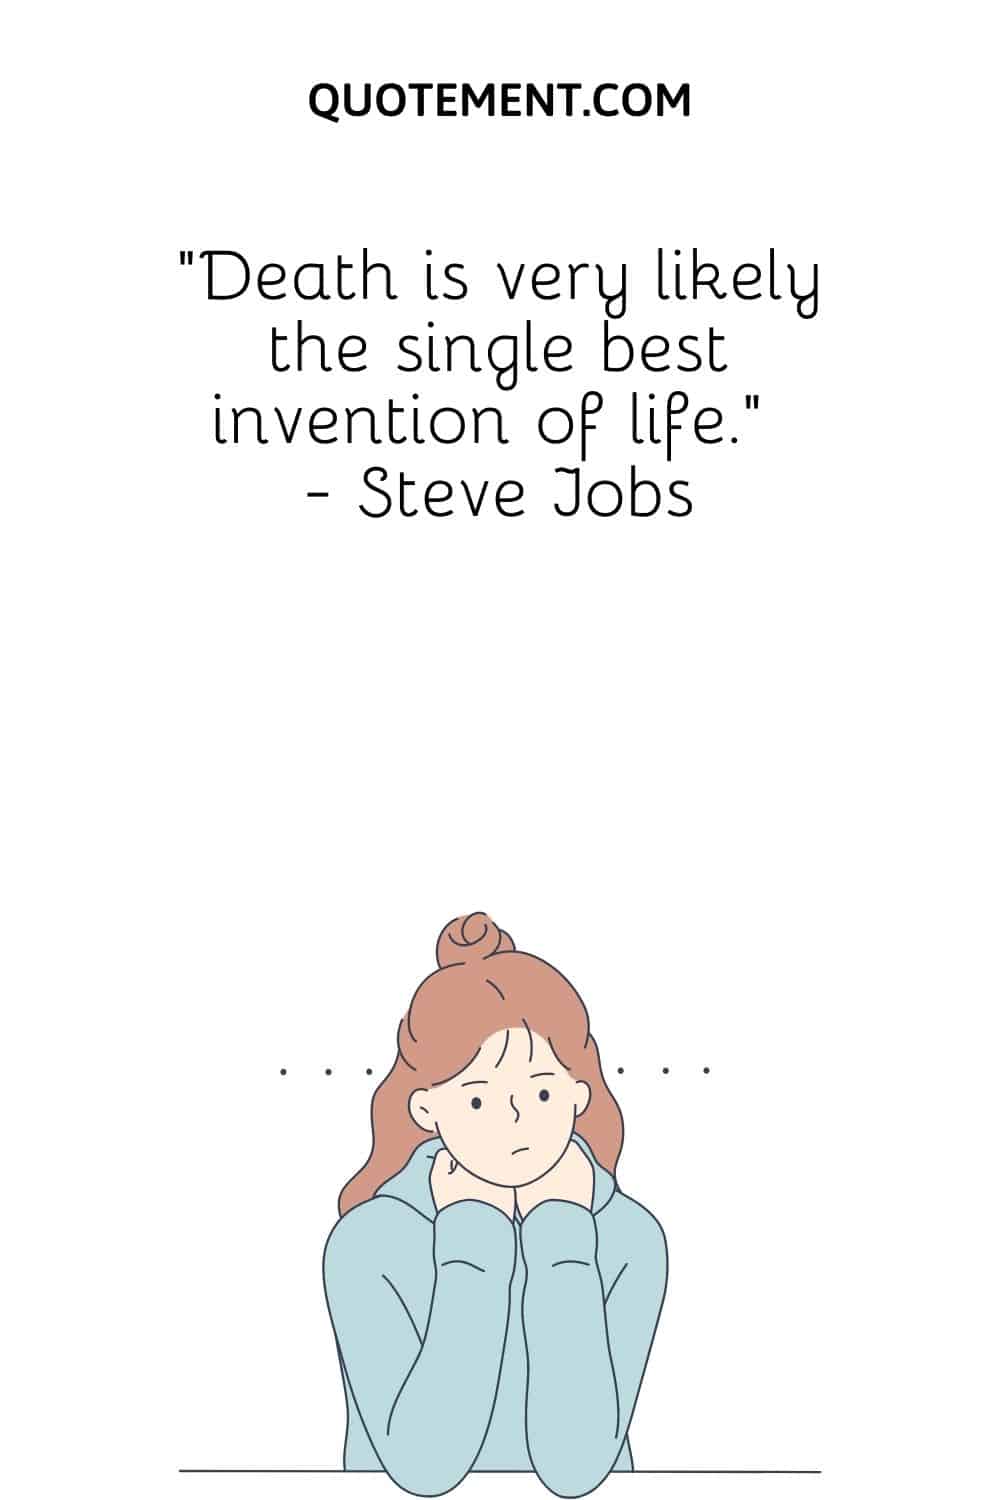 Death is very likely the single best invention of life